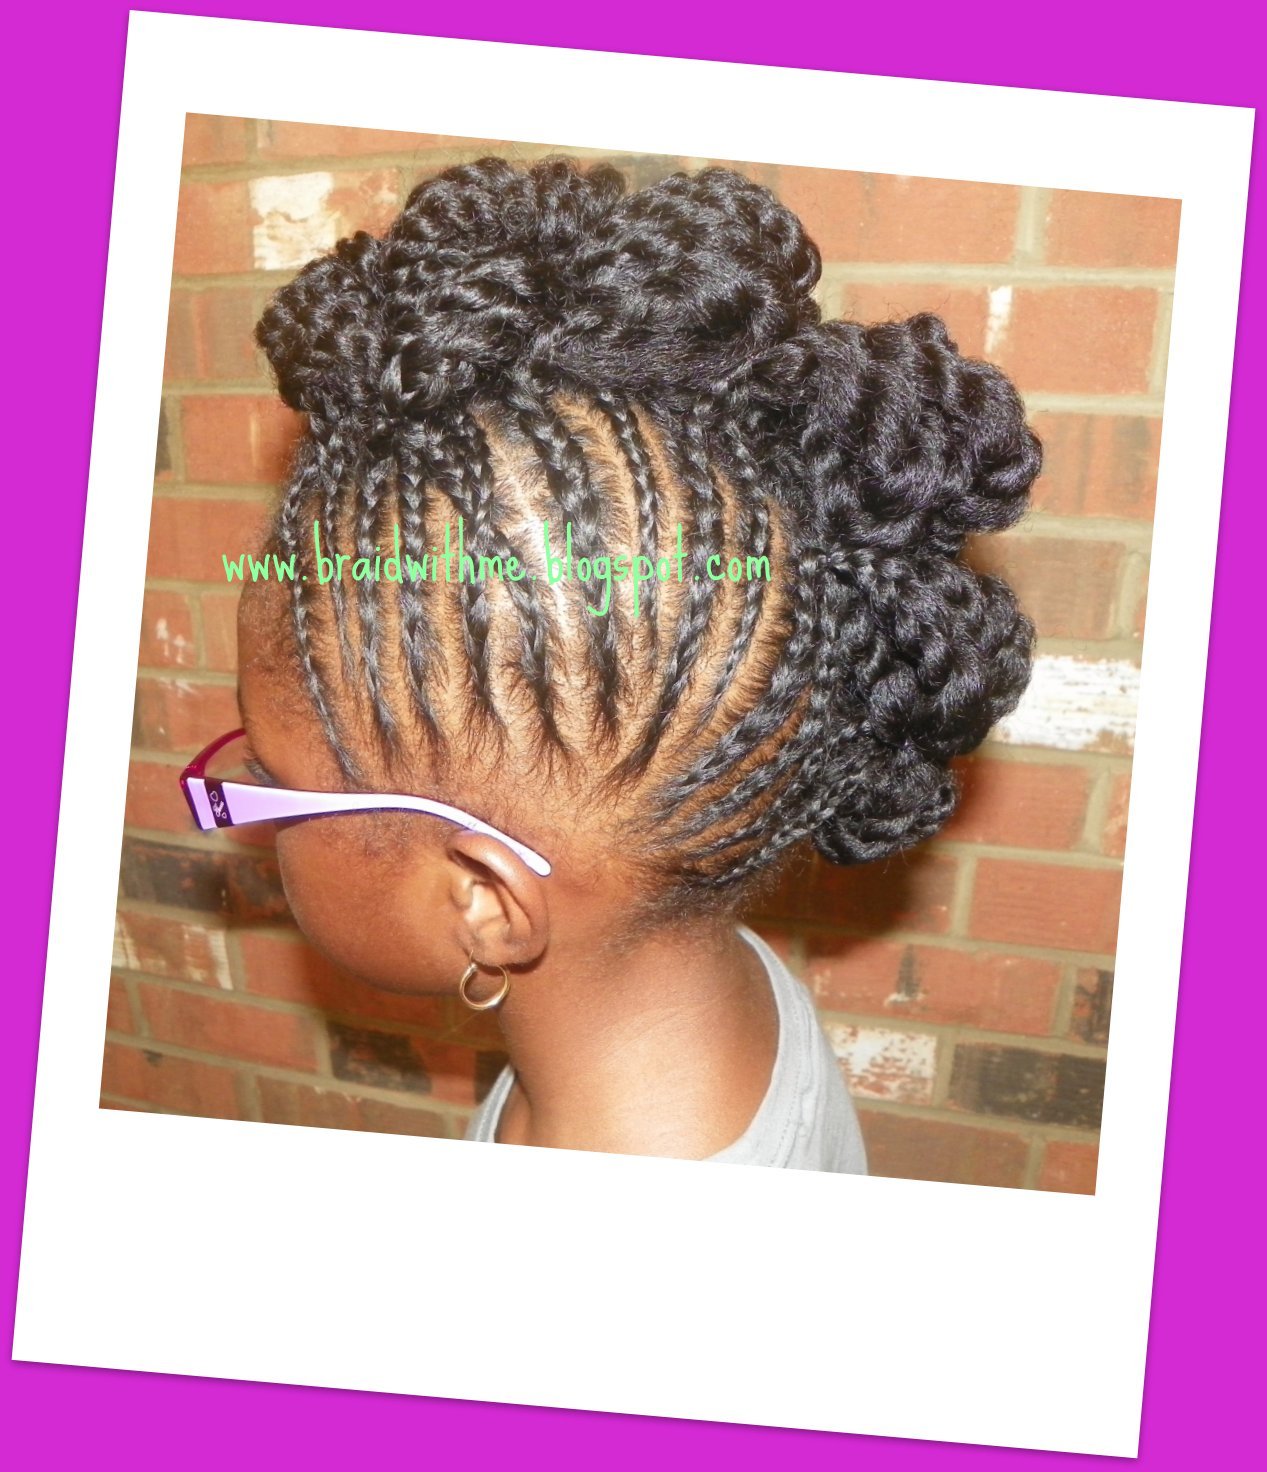 Beads, Braids and Beyond: Braided, Twisted & Rolled + Introducing